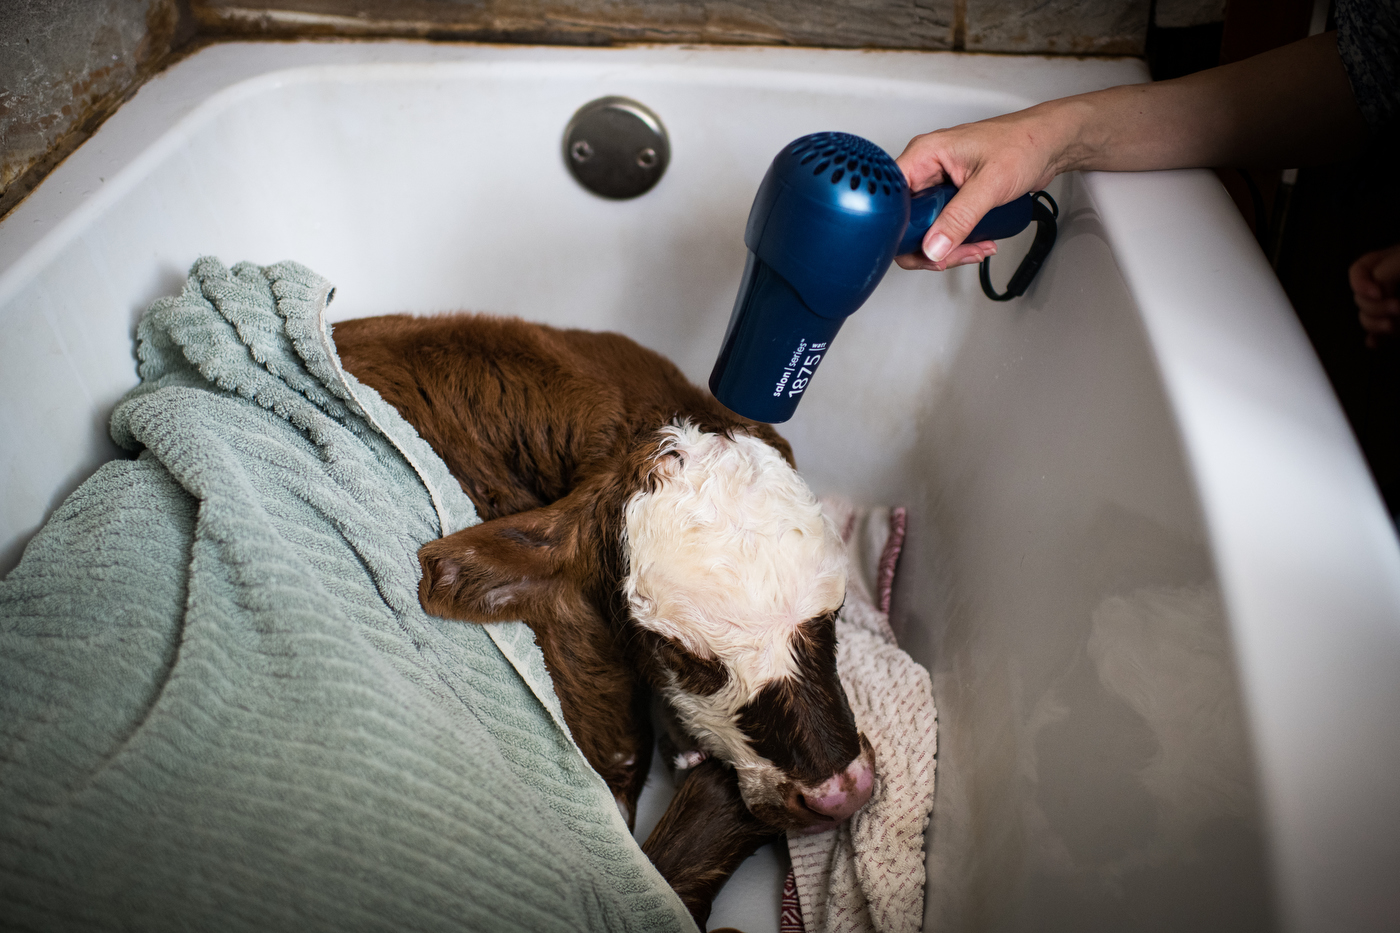  45°32'31.2"N 102°29'52.2"W. 110 miles from the nearest McDonald's.  Eliza Loughlin blows a hairdryer over the cold and wet fur of an hour-old calf born in the middle of a blizzard and brought in to the family bathtub by her husband Max Loughlin in B